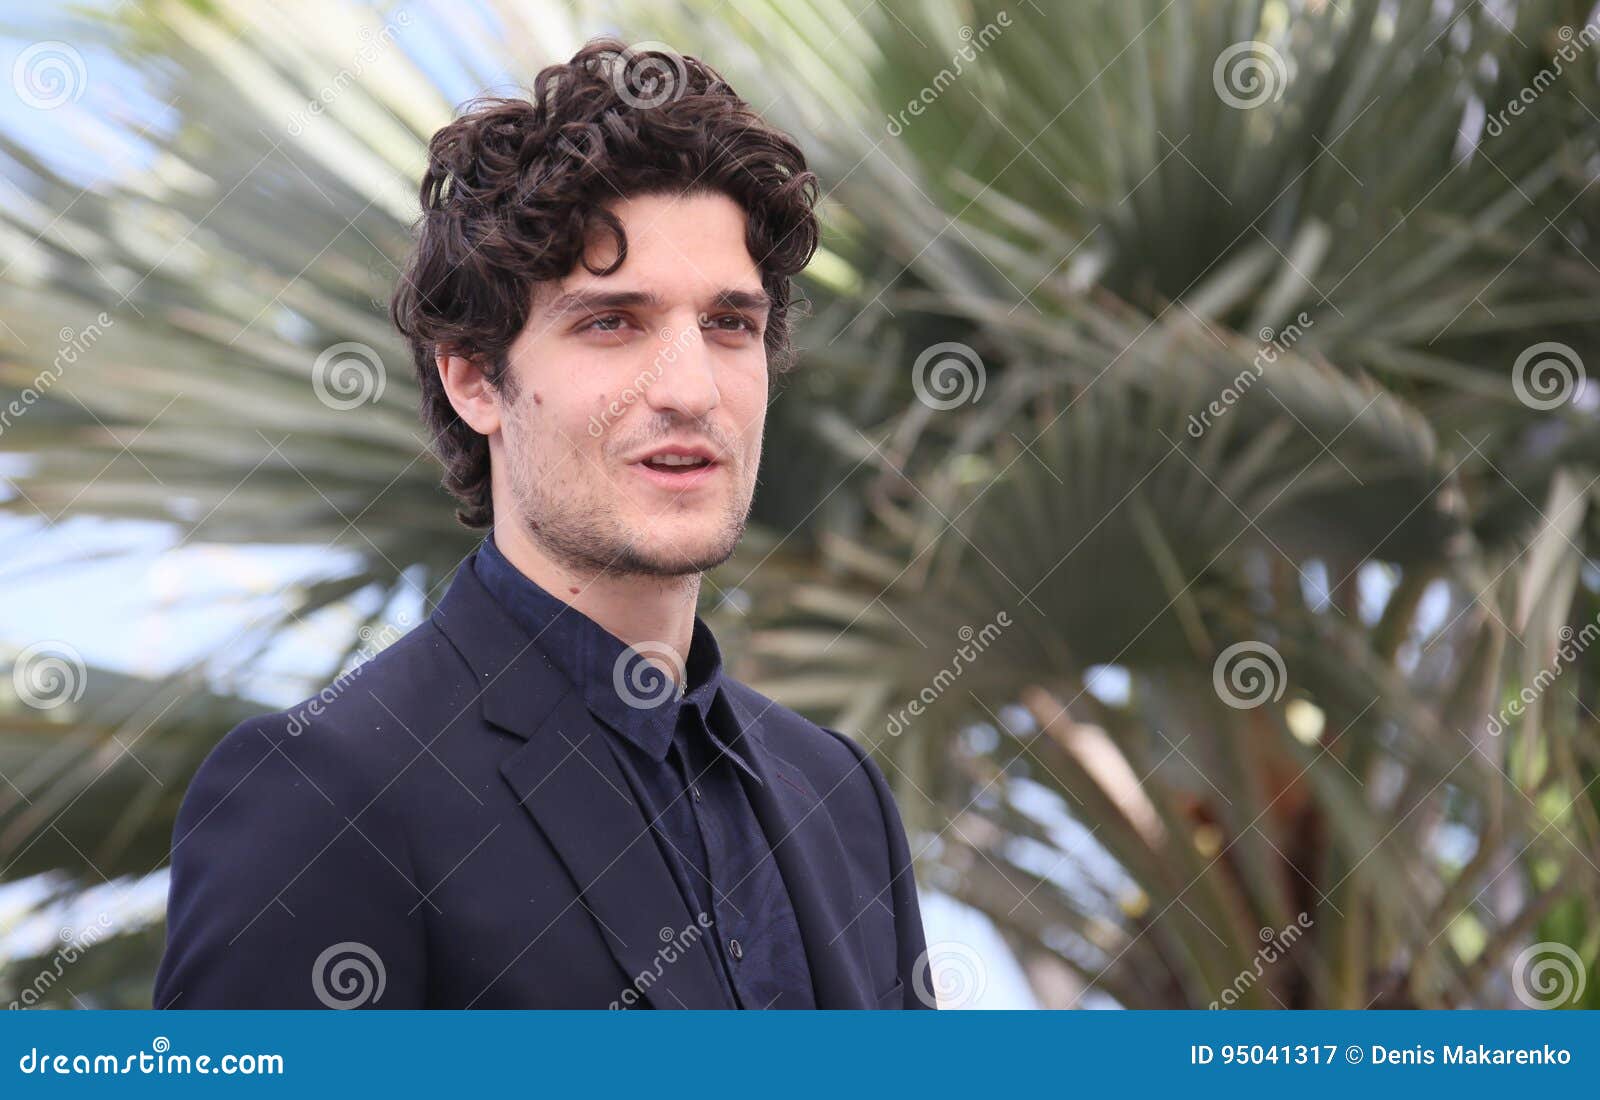 Louis Garrel Attends the `Redoutable Le Redoutable` Editorial